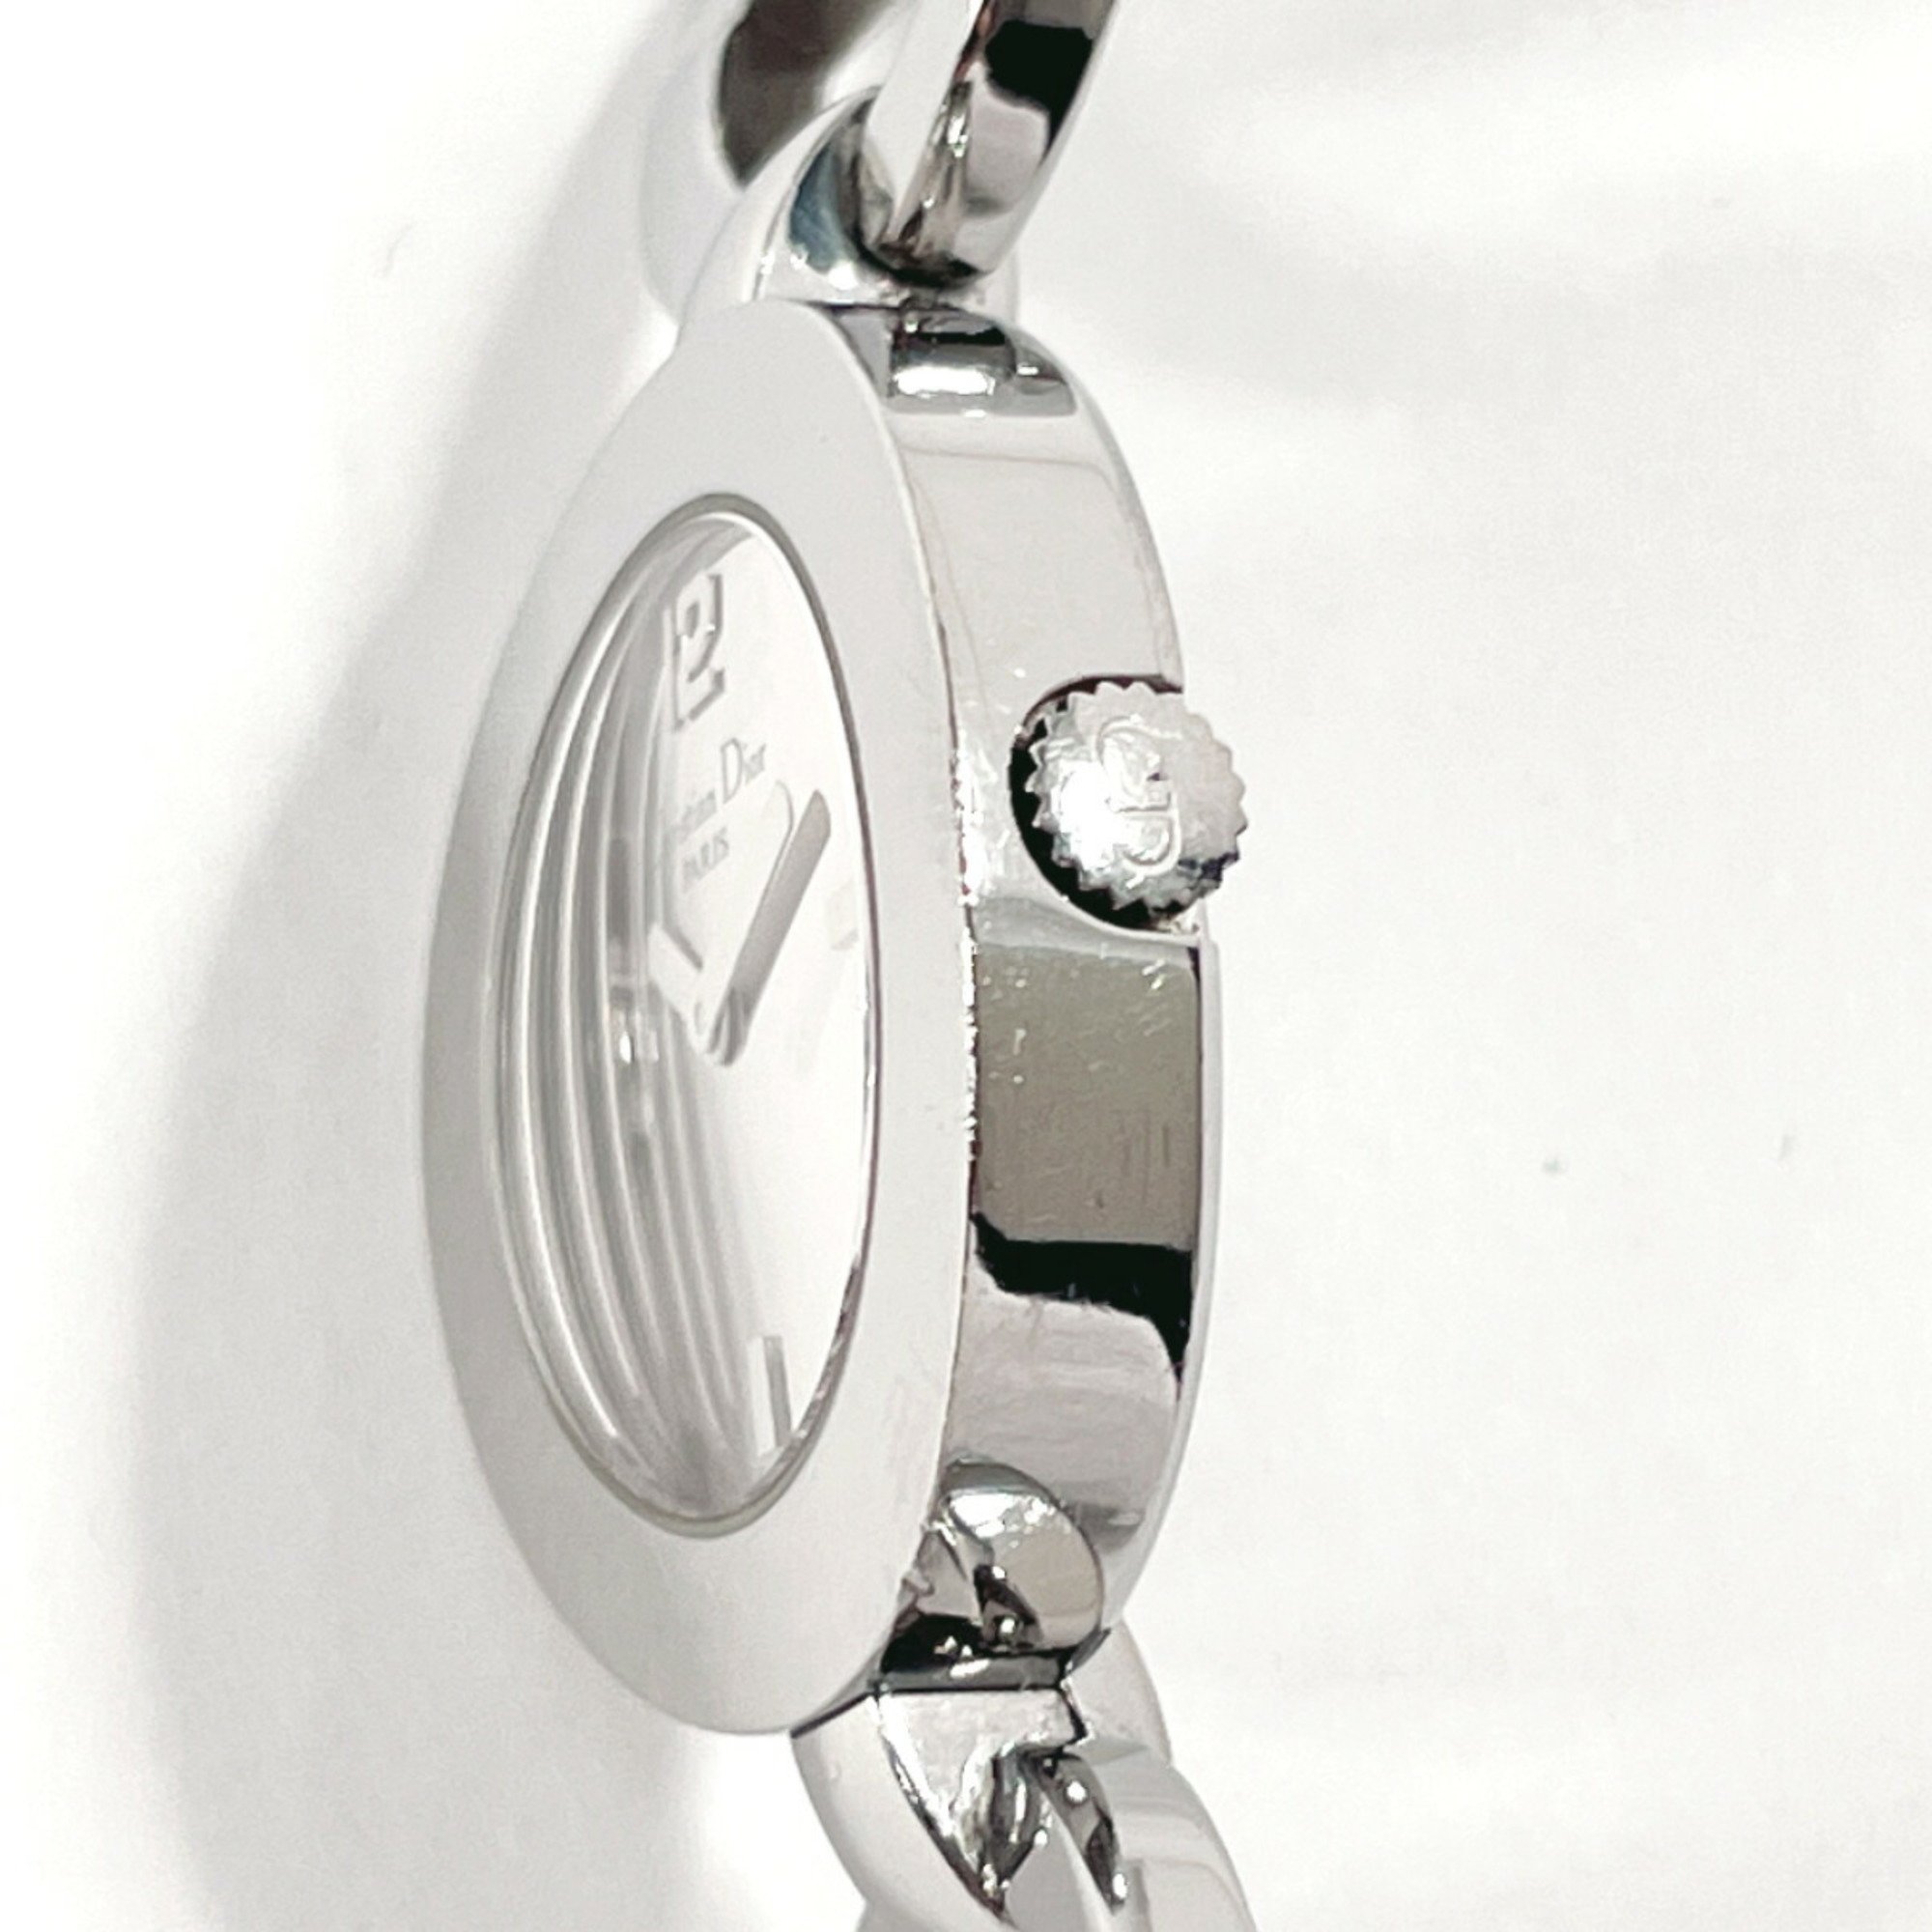 Christian Dior Malice CD022110 Watch Stainless Steel/Stainless Steel Silver Quartz Dial Women's F3123511